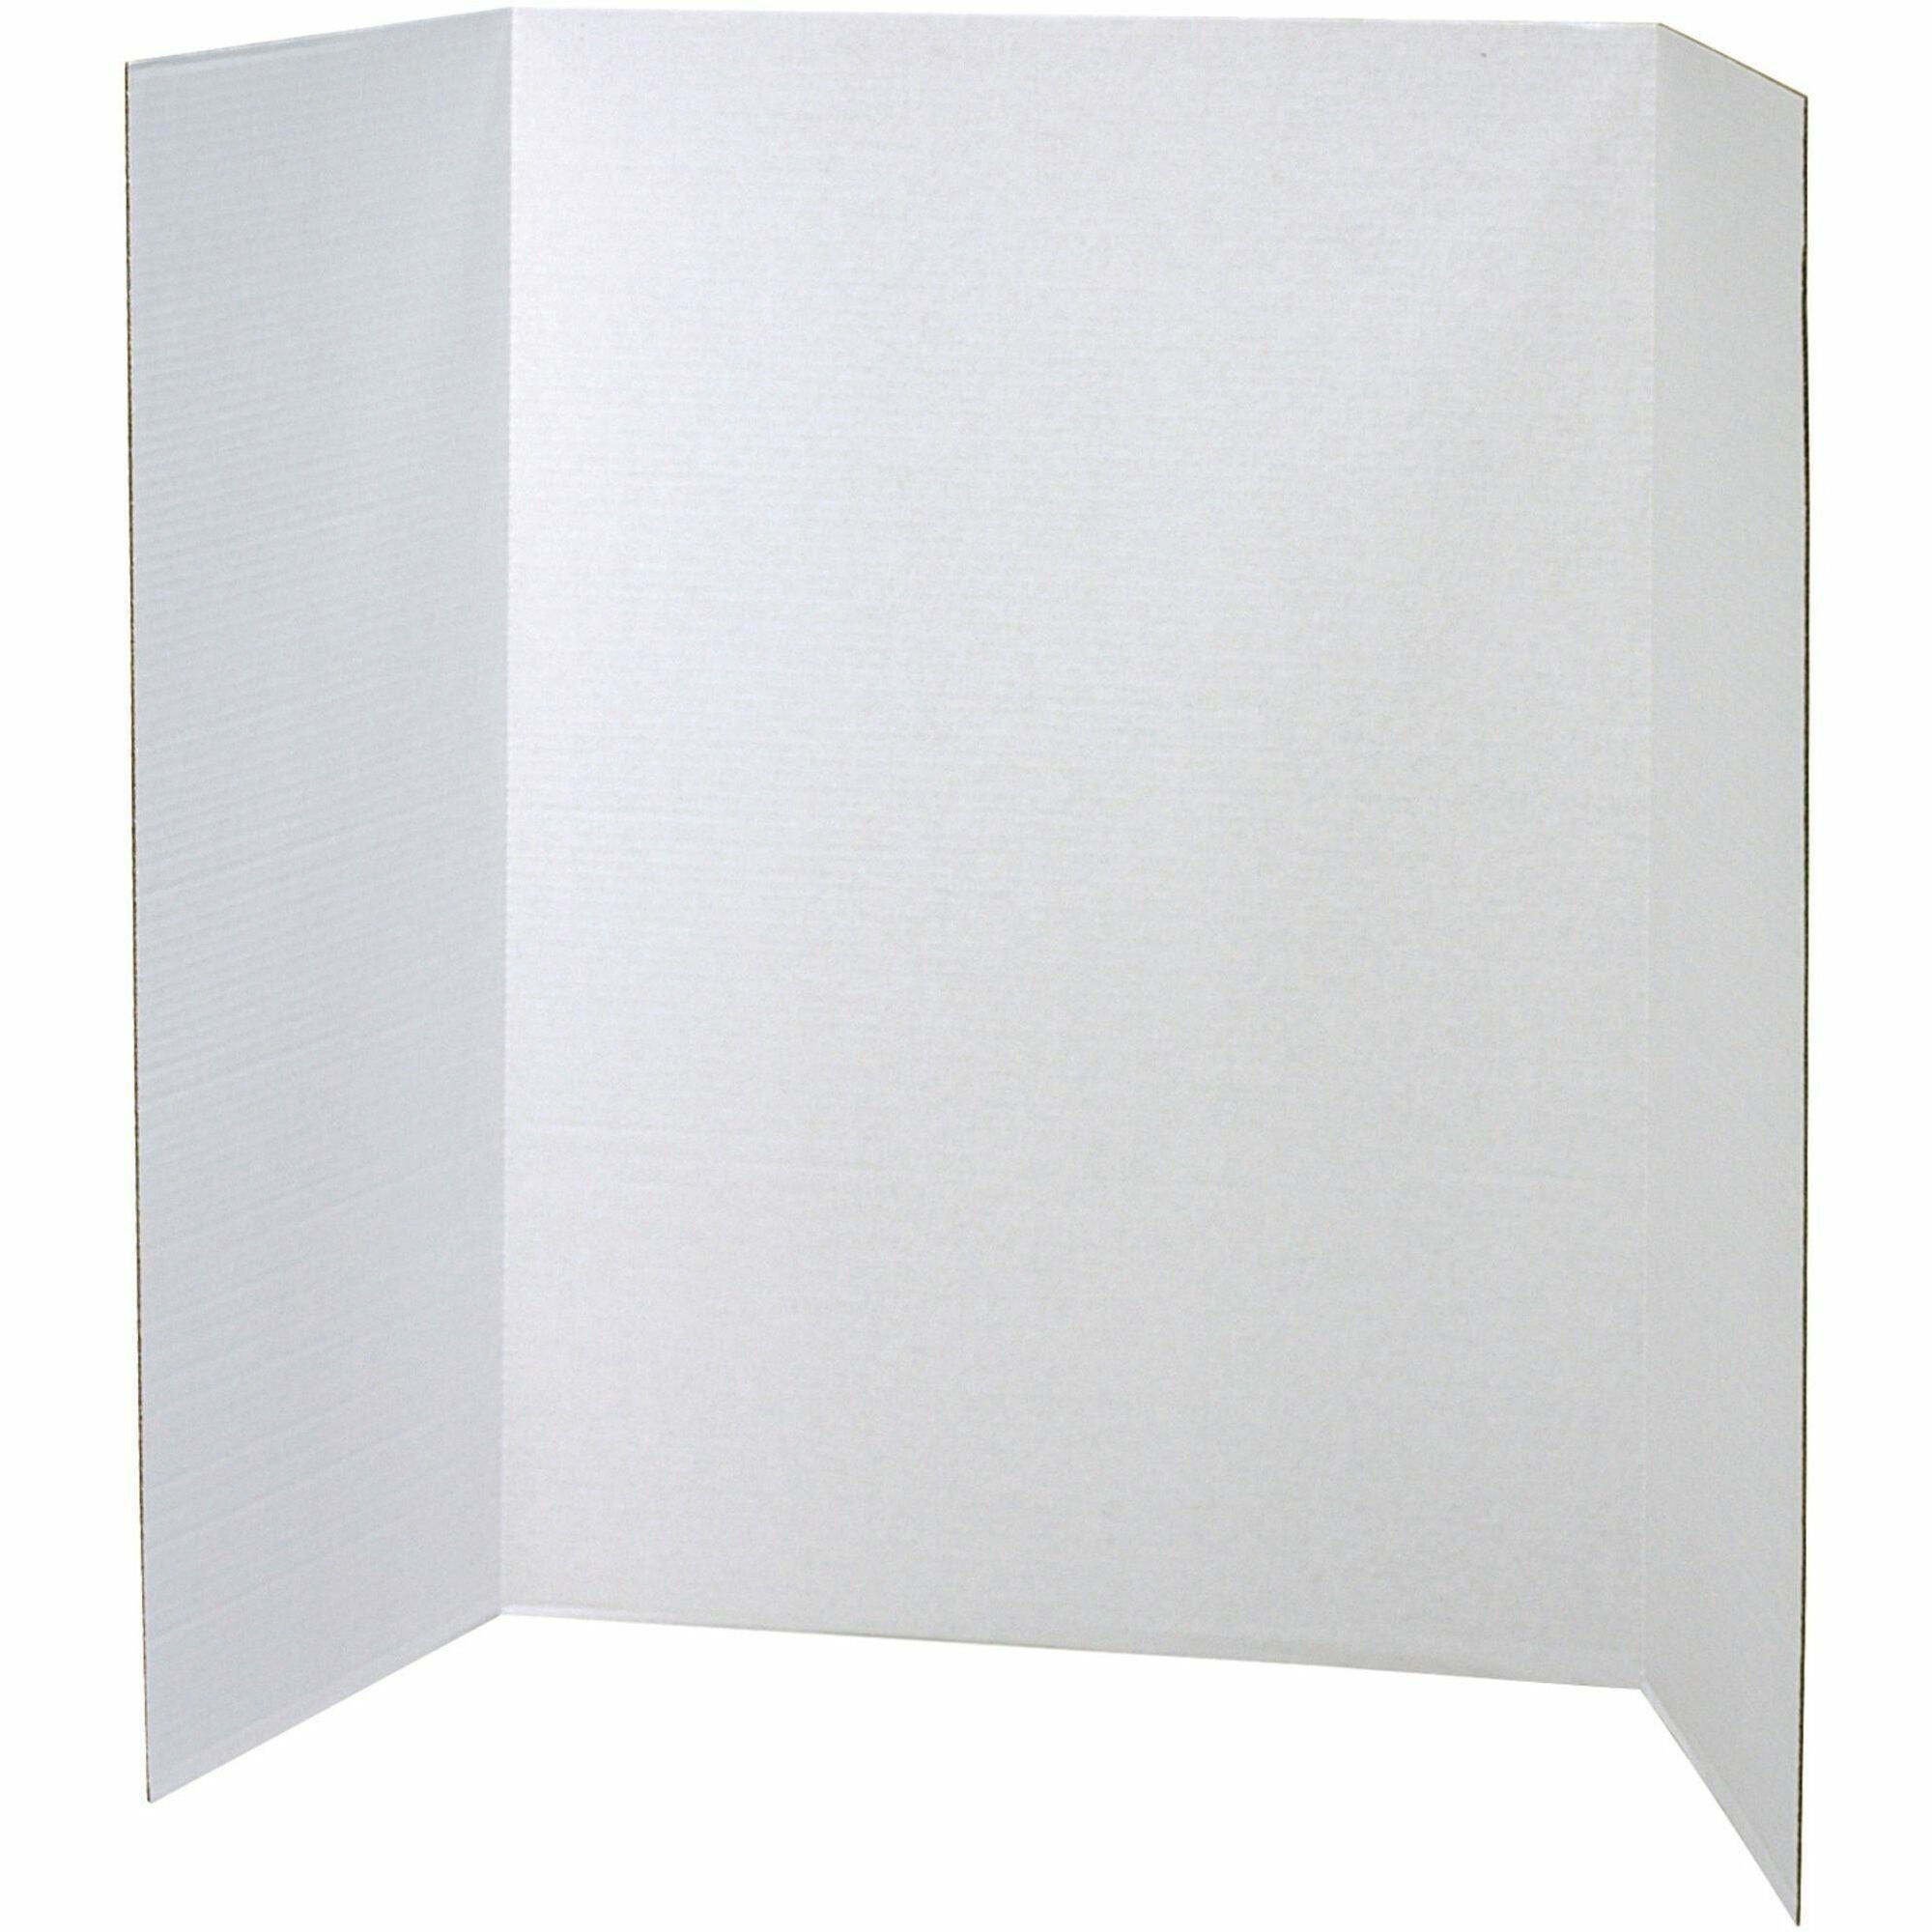 Pacon Presentation Boards - 28" Height x 40" Width - White Surface - 8 / Carton - 